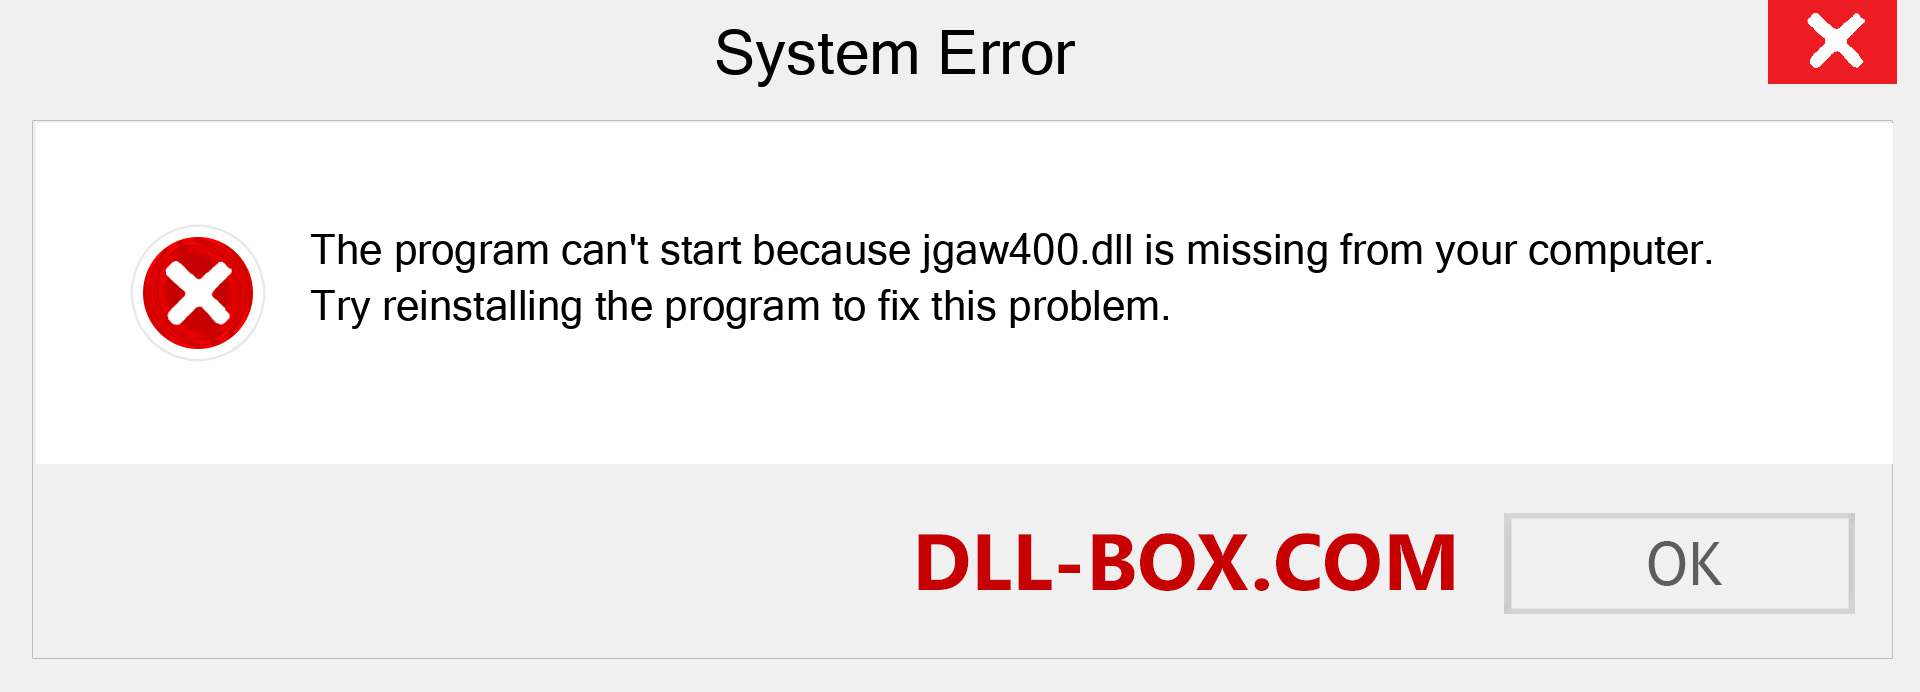  jgaw400.dll file is missing?. Download for Windows 7, 8, 10 - Fix  jgaw400 dll Missing Error on Windows, photos, images